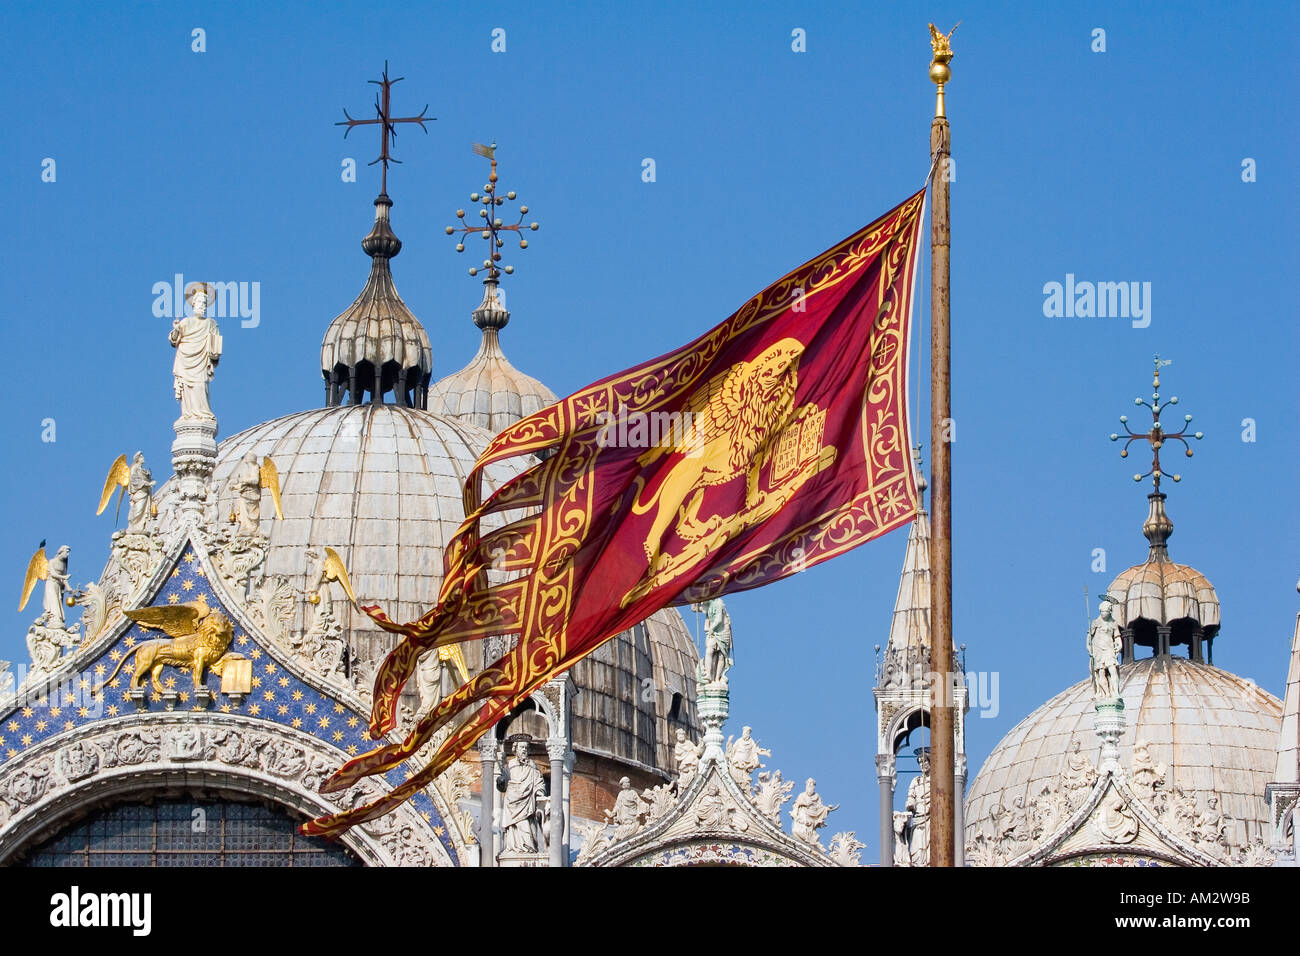 Venetian flag flying in front of the Basilica San Marco in the Piazza San Marco Venice Italy Stock Photo